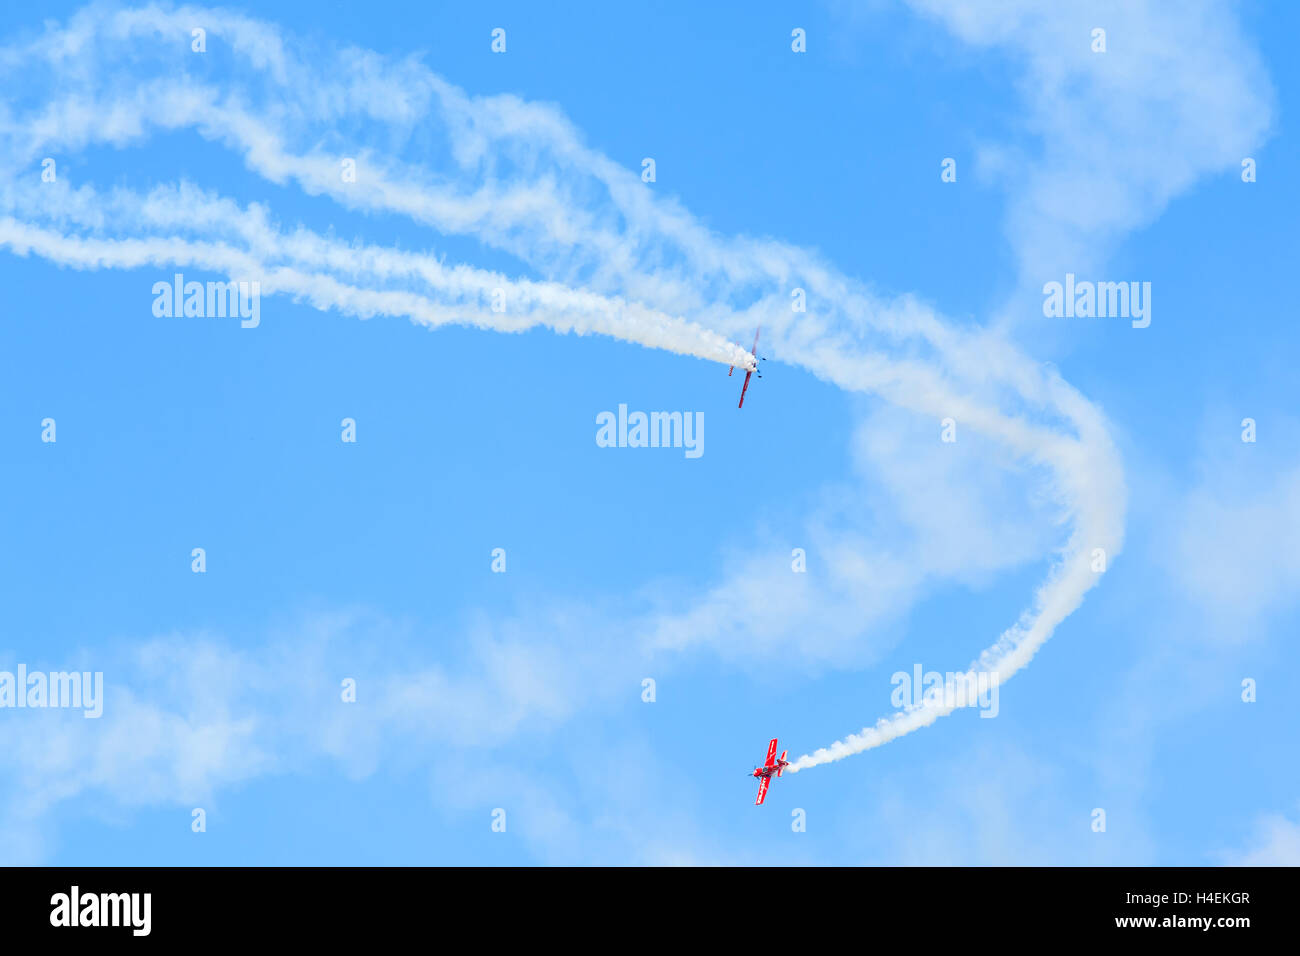 KRAKOW MUSEUM OF AVIATION, POLAND - JUL 27, 2014: two red acrobatic planes flying on blue sky at airshow in Krakow, Poland. In summer often airshows take place here. Stock Photo